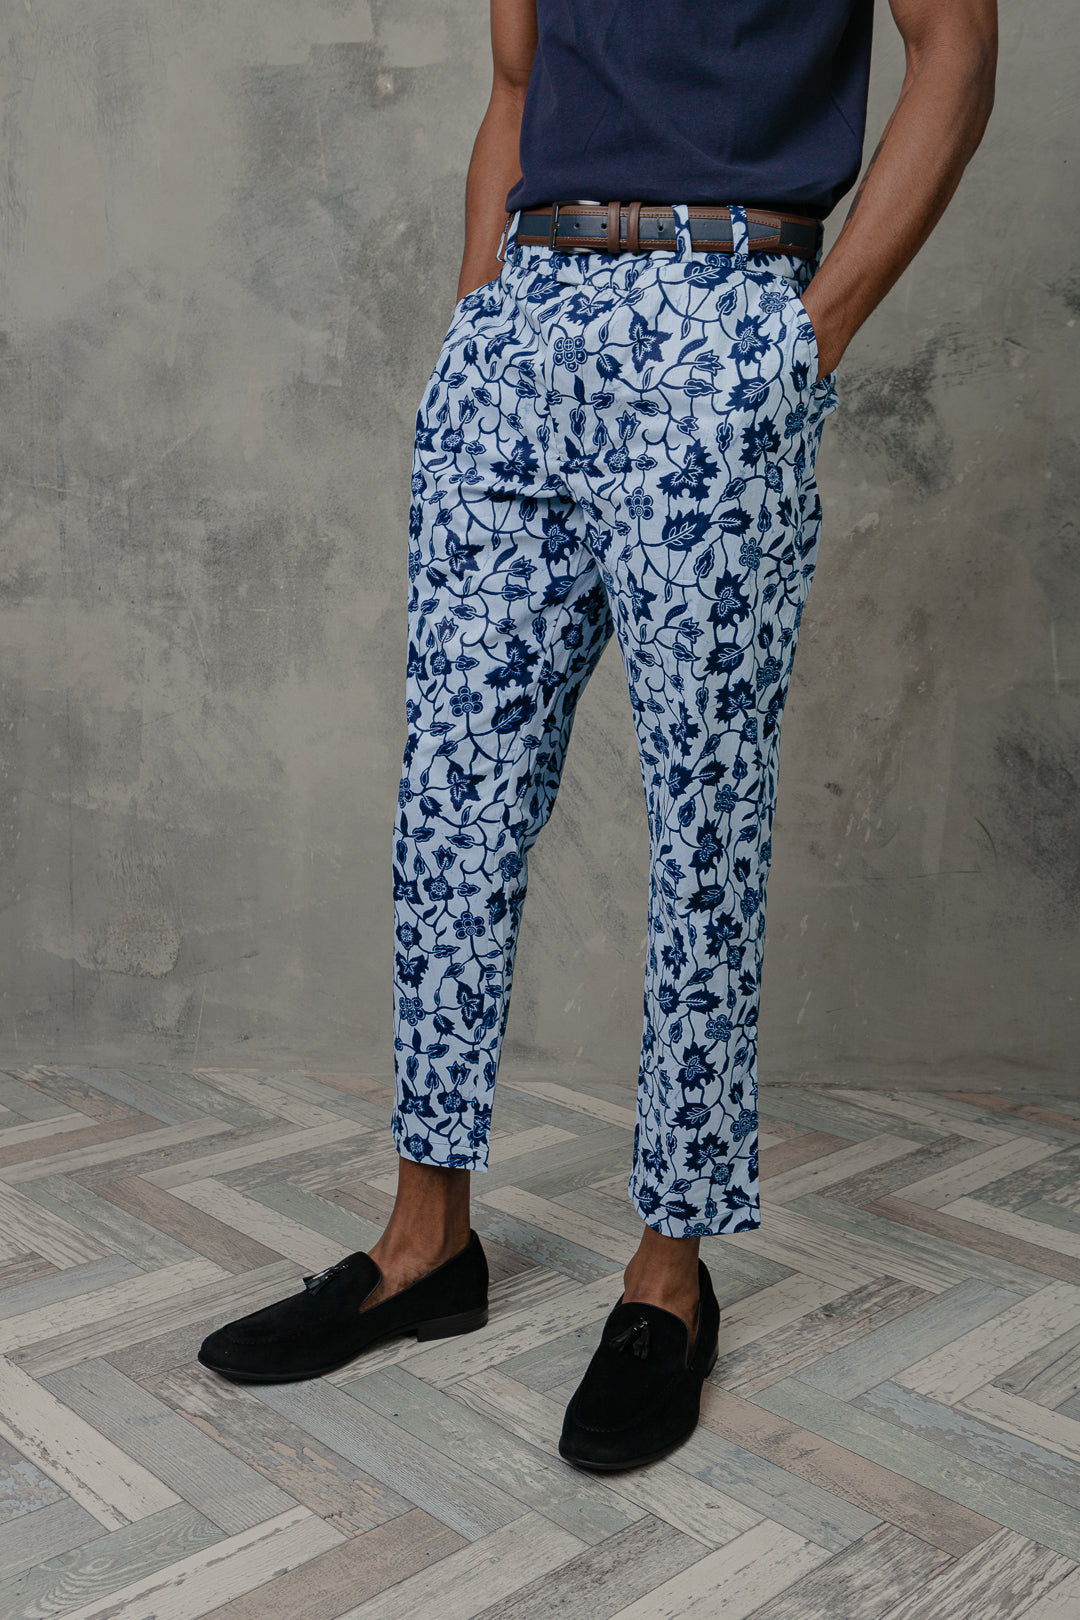 Sales Today Clearance Summer Cotton Linen Pants for Women Wide Leg Tulip Cropped  Trousers Floral Print Boho Beach Pant with Pockets Todays Daily Deals Black  at Amazon Women's Clothing store